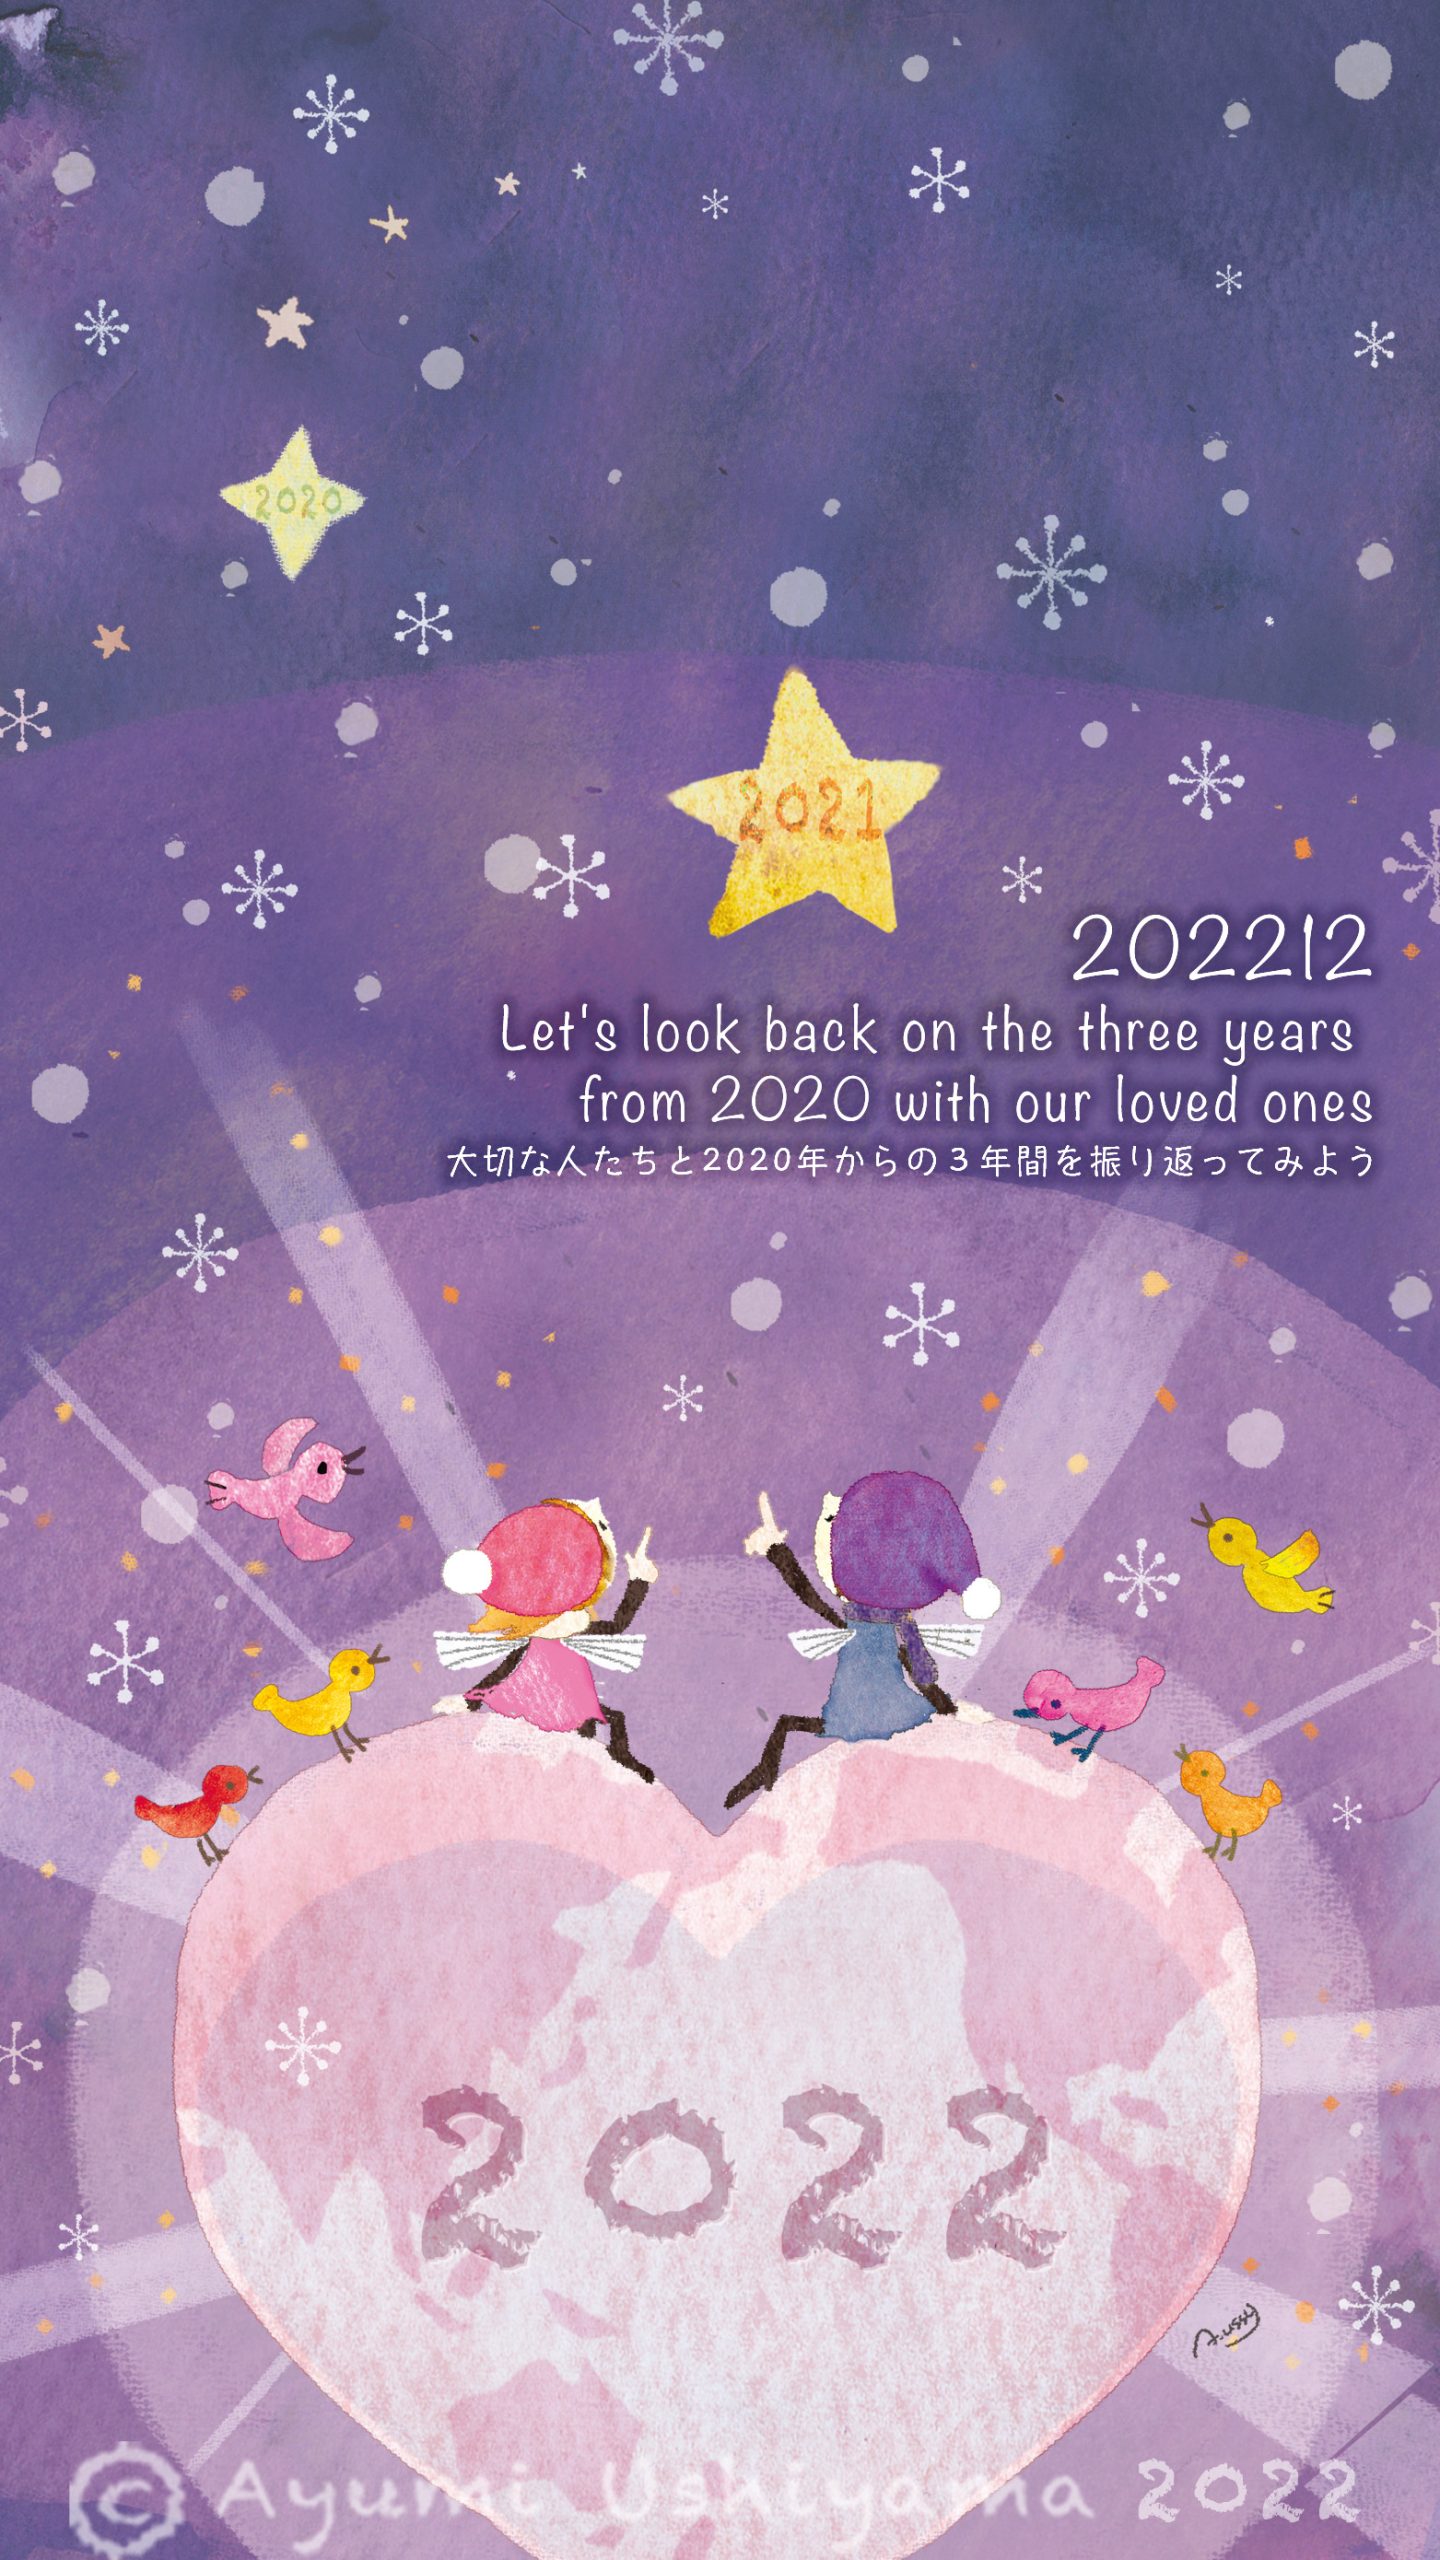 2022.12『Let’s look back on the three years  from 2020 with our loved ones』